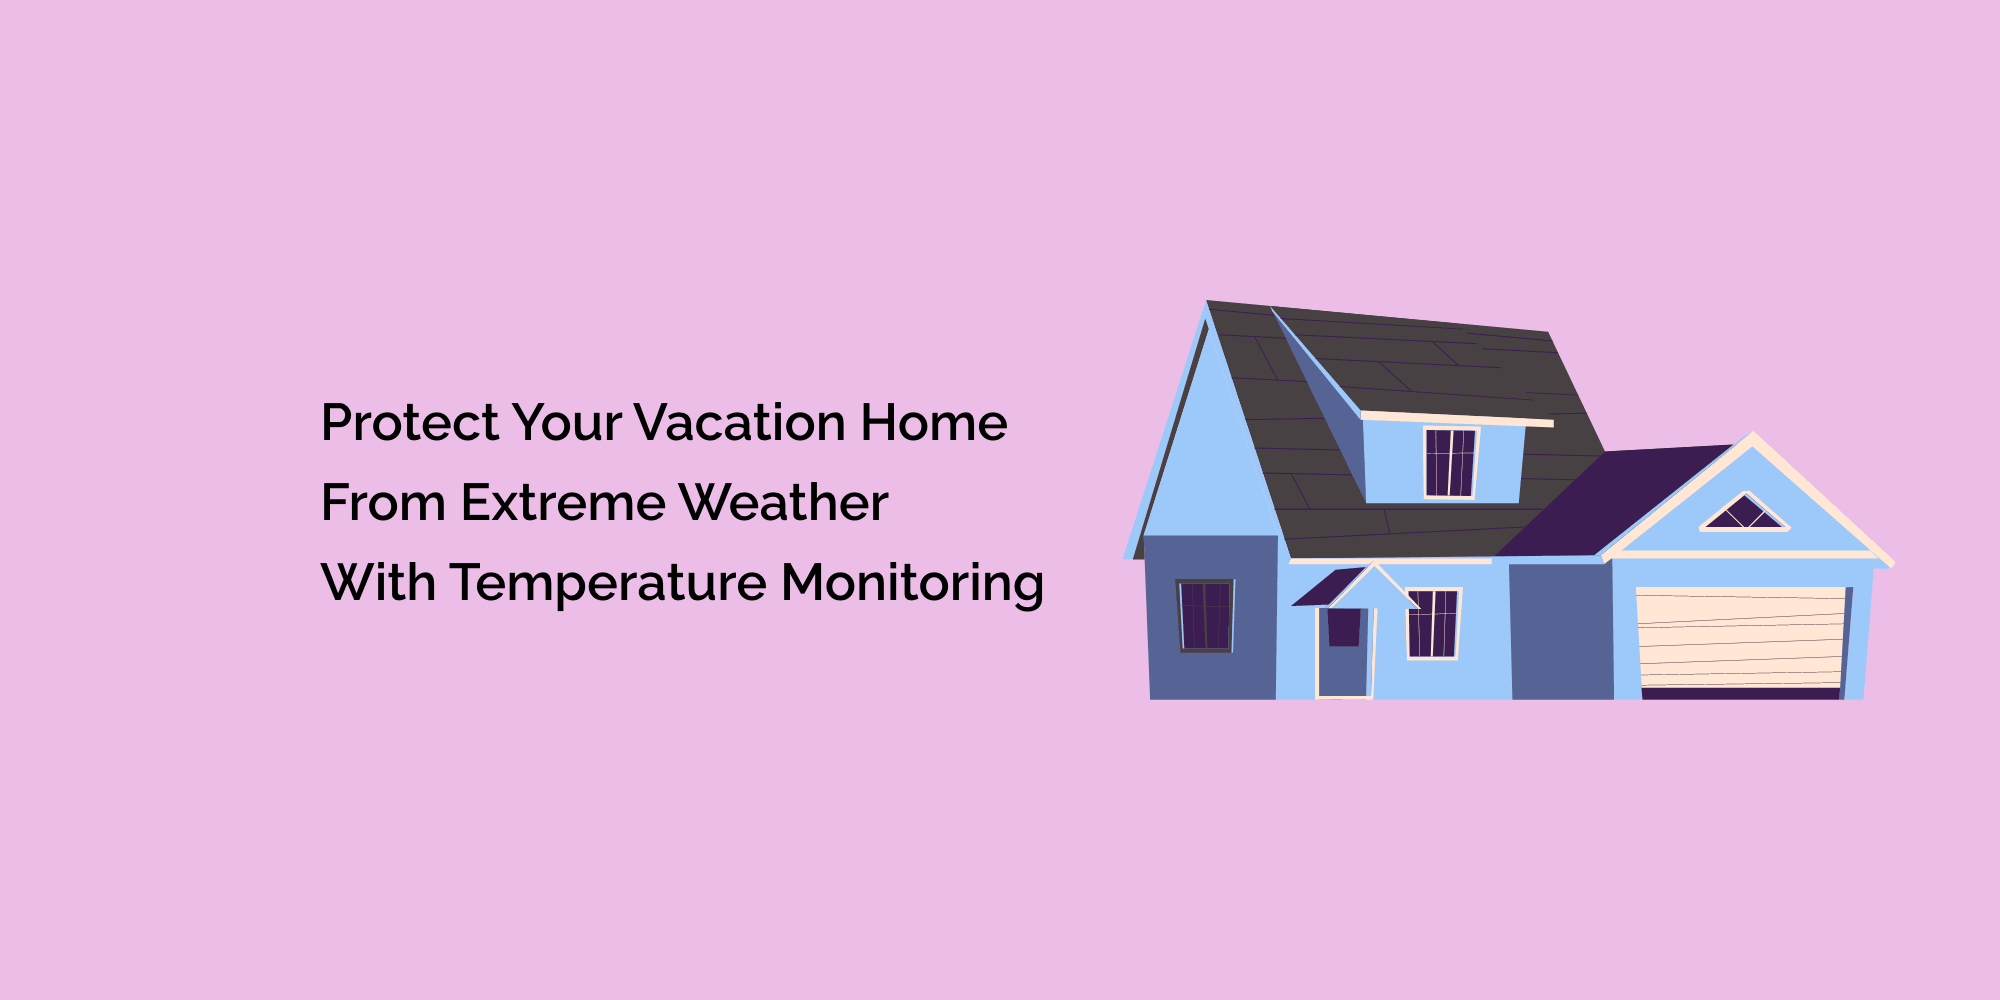 Protect Your Vacation Home from Extreme Weather with Temperature Monitoring